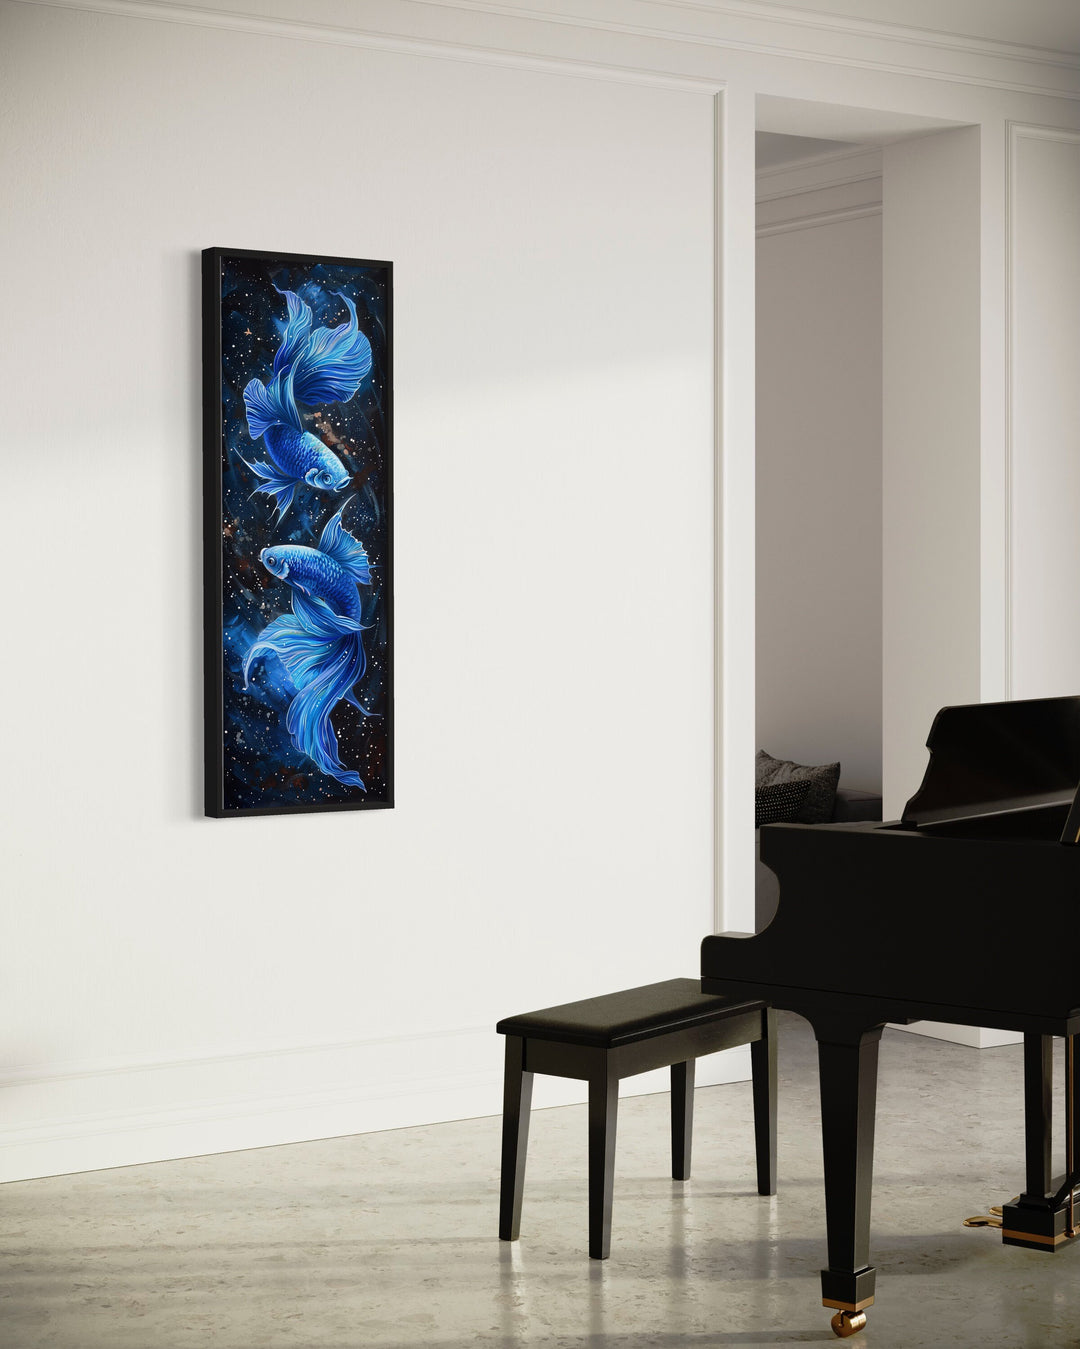 Tall Narrow Blue Betta Fish On Black Vertical Wall Art "Sapphire Swirl" in music room with piano